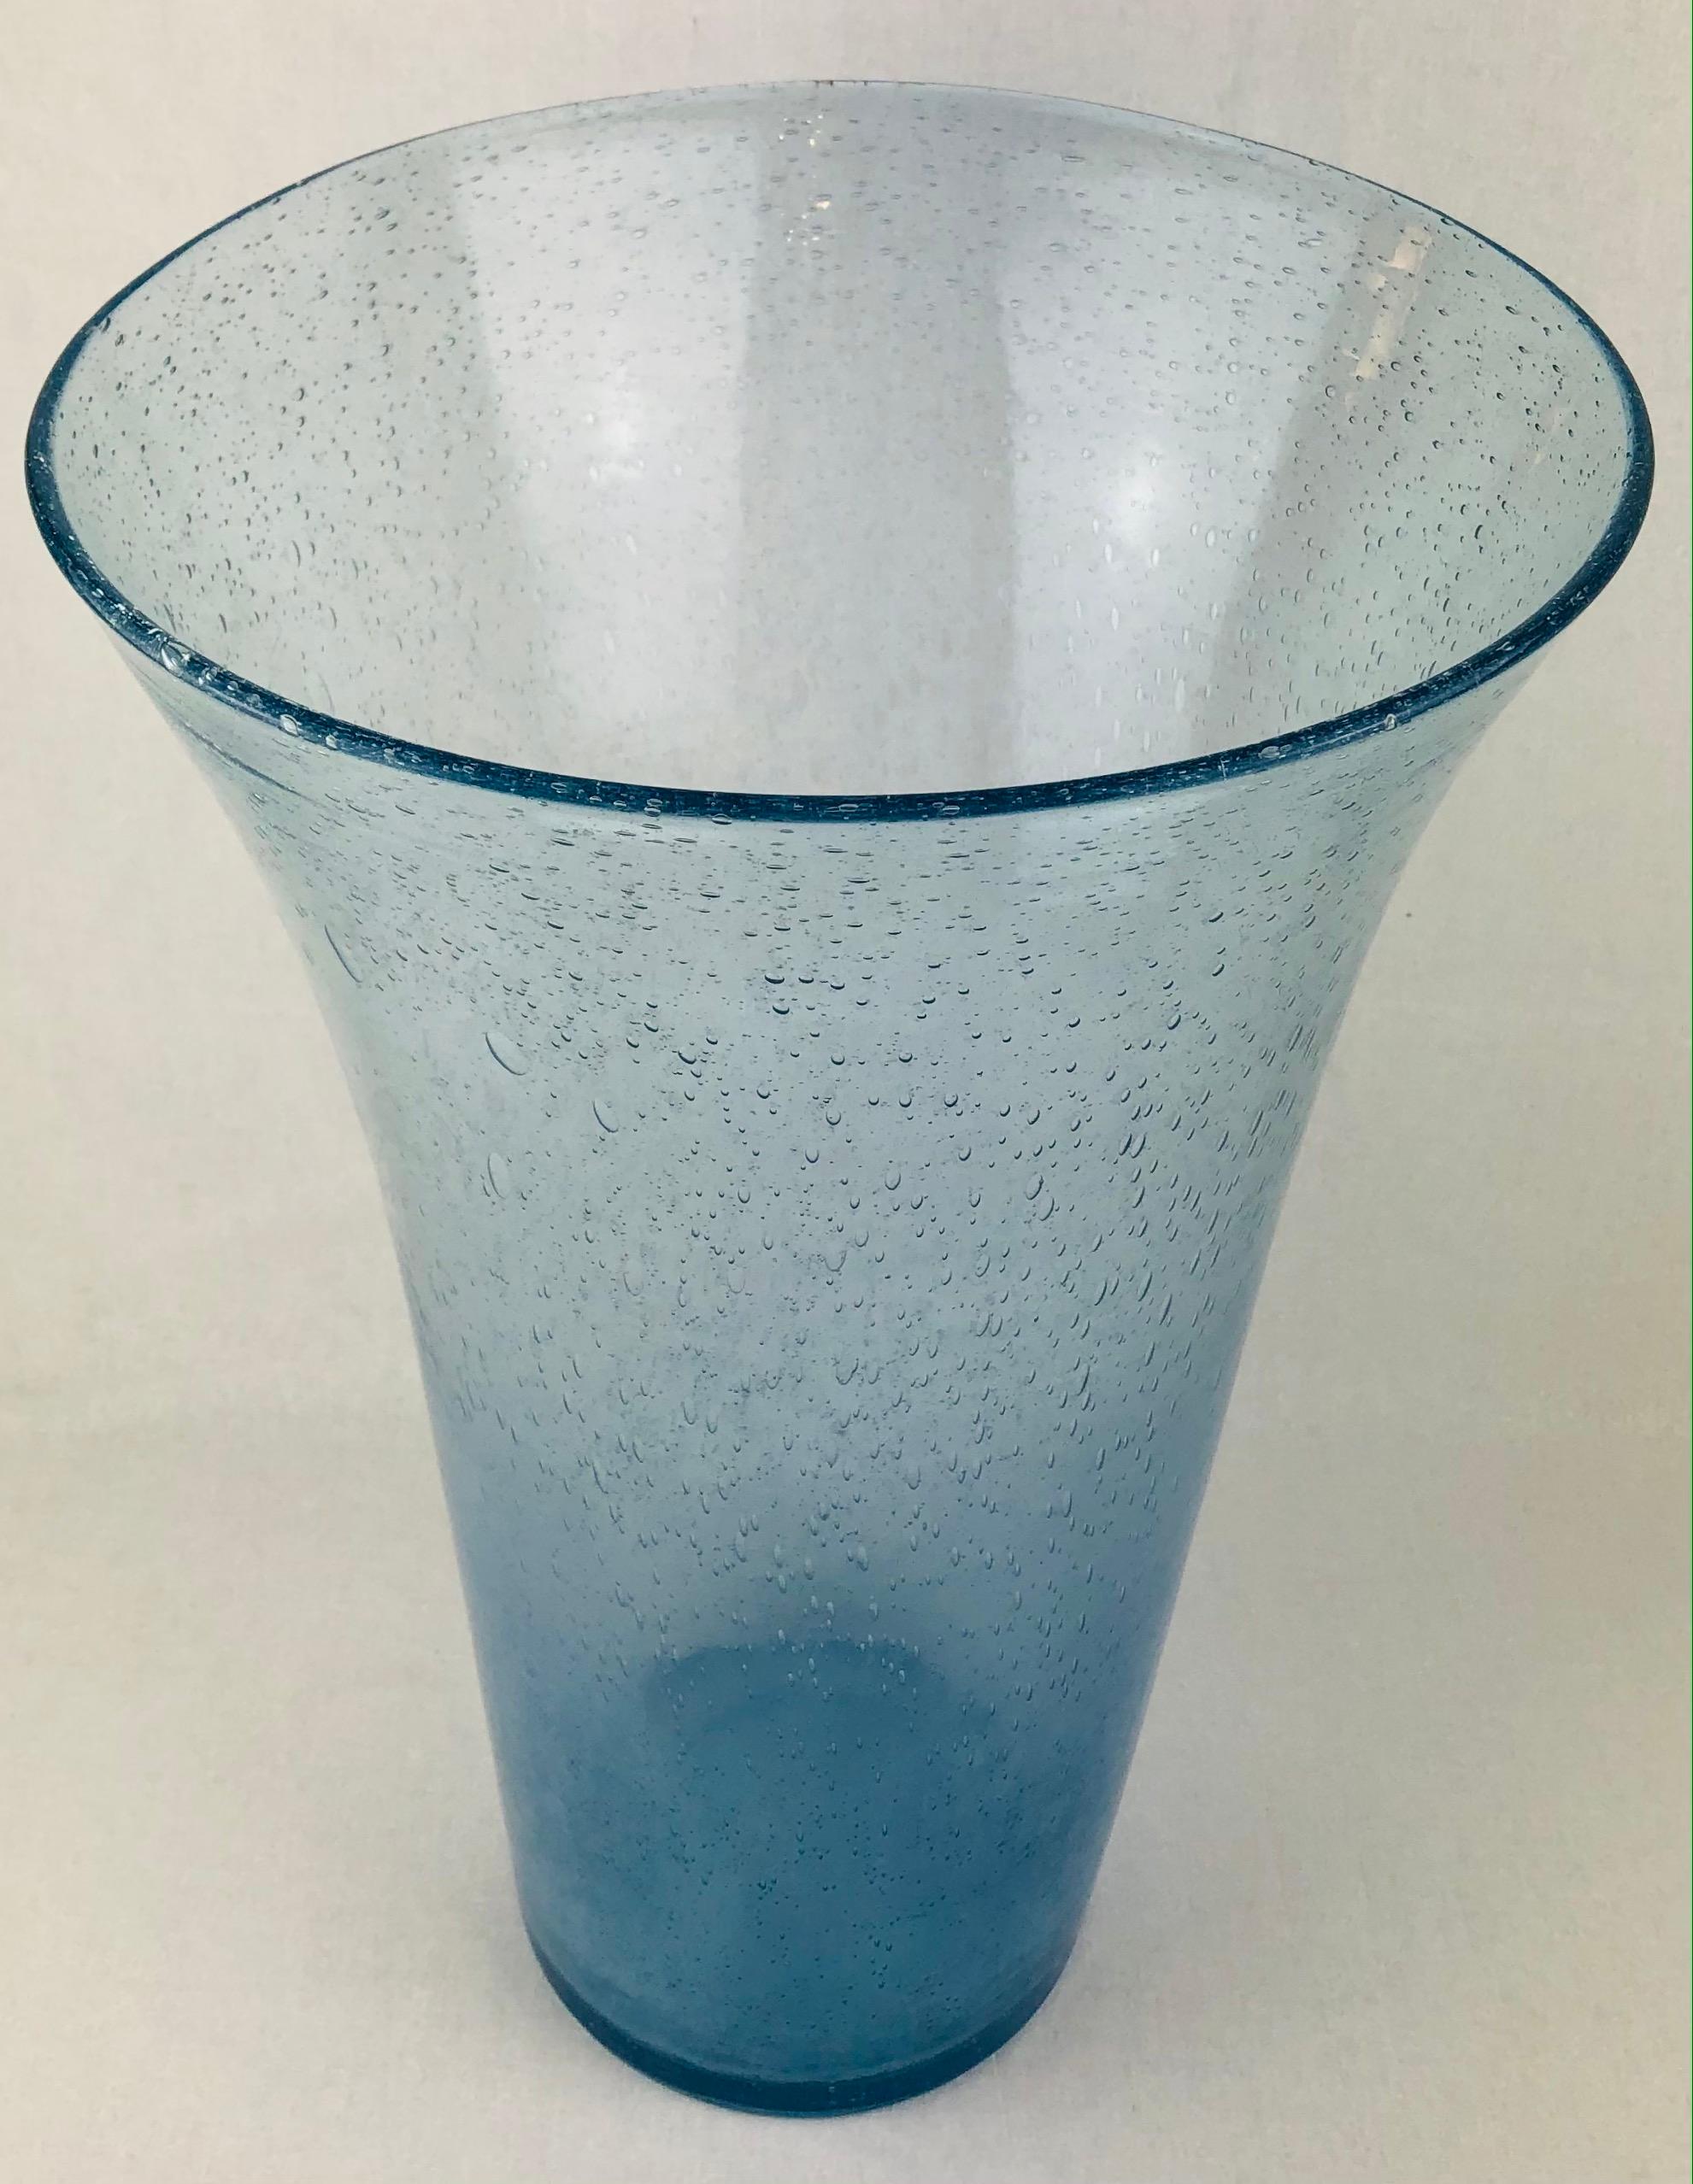 Large Murano art glass art glass vase in a beautiful translucent blue. 
Hand-blown with bubble inclusions.

Very good vintage condition, some minor traces of mineral deposits. 
Slight irregularity on the top rim, not perfectly round.

Measures: 18